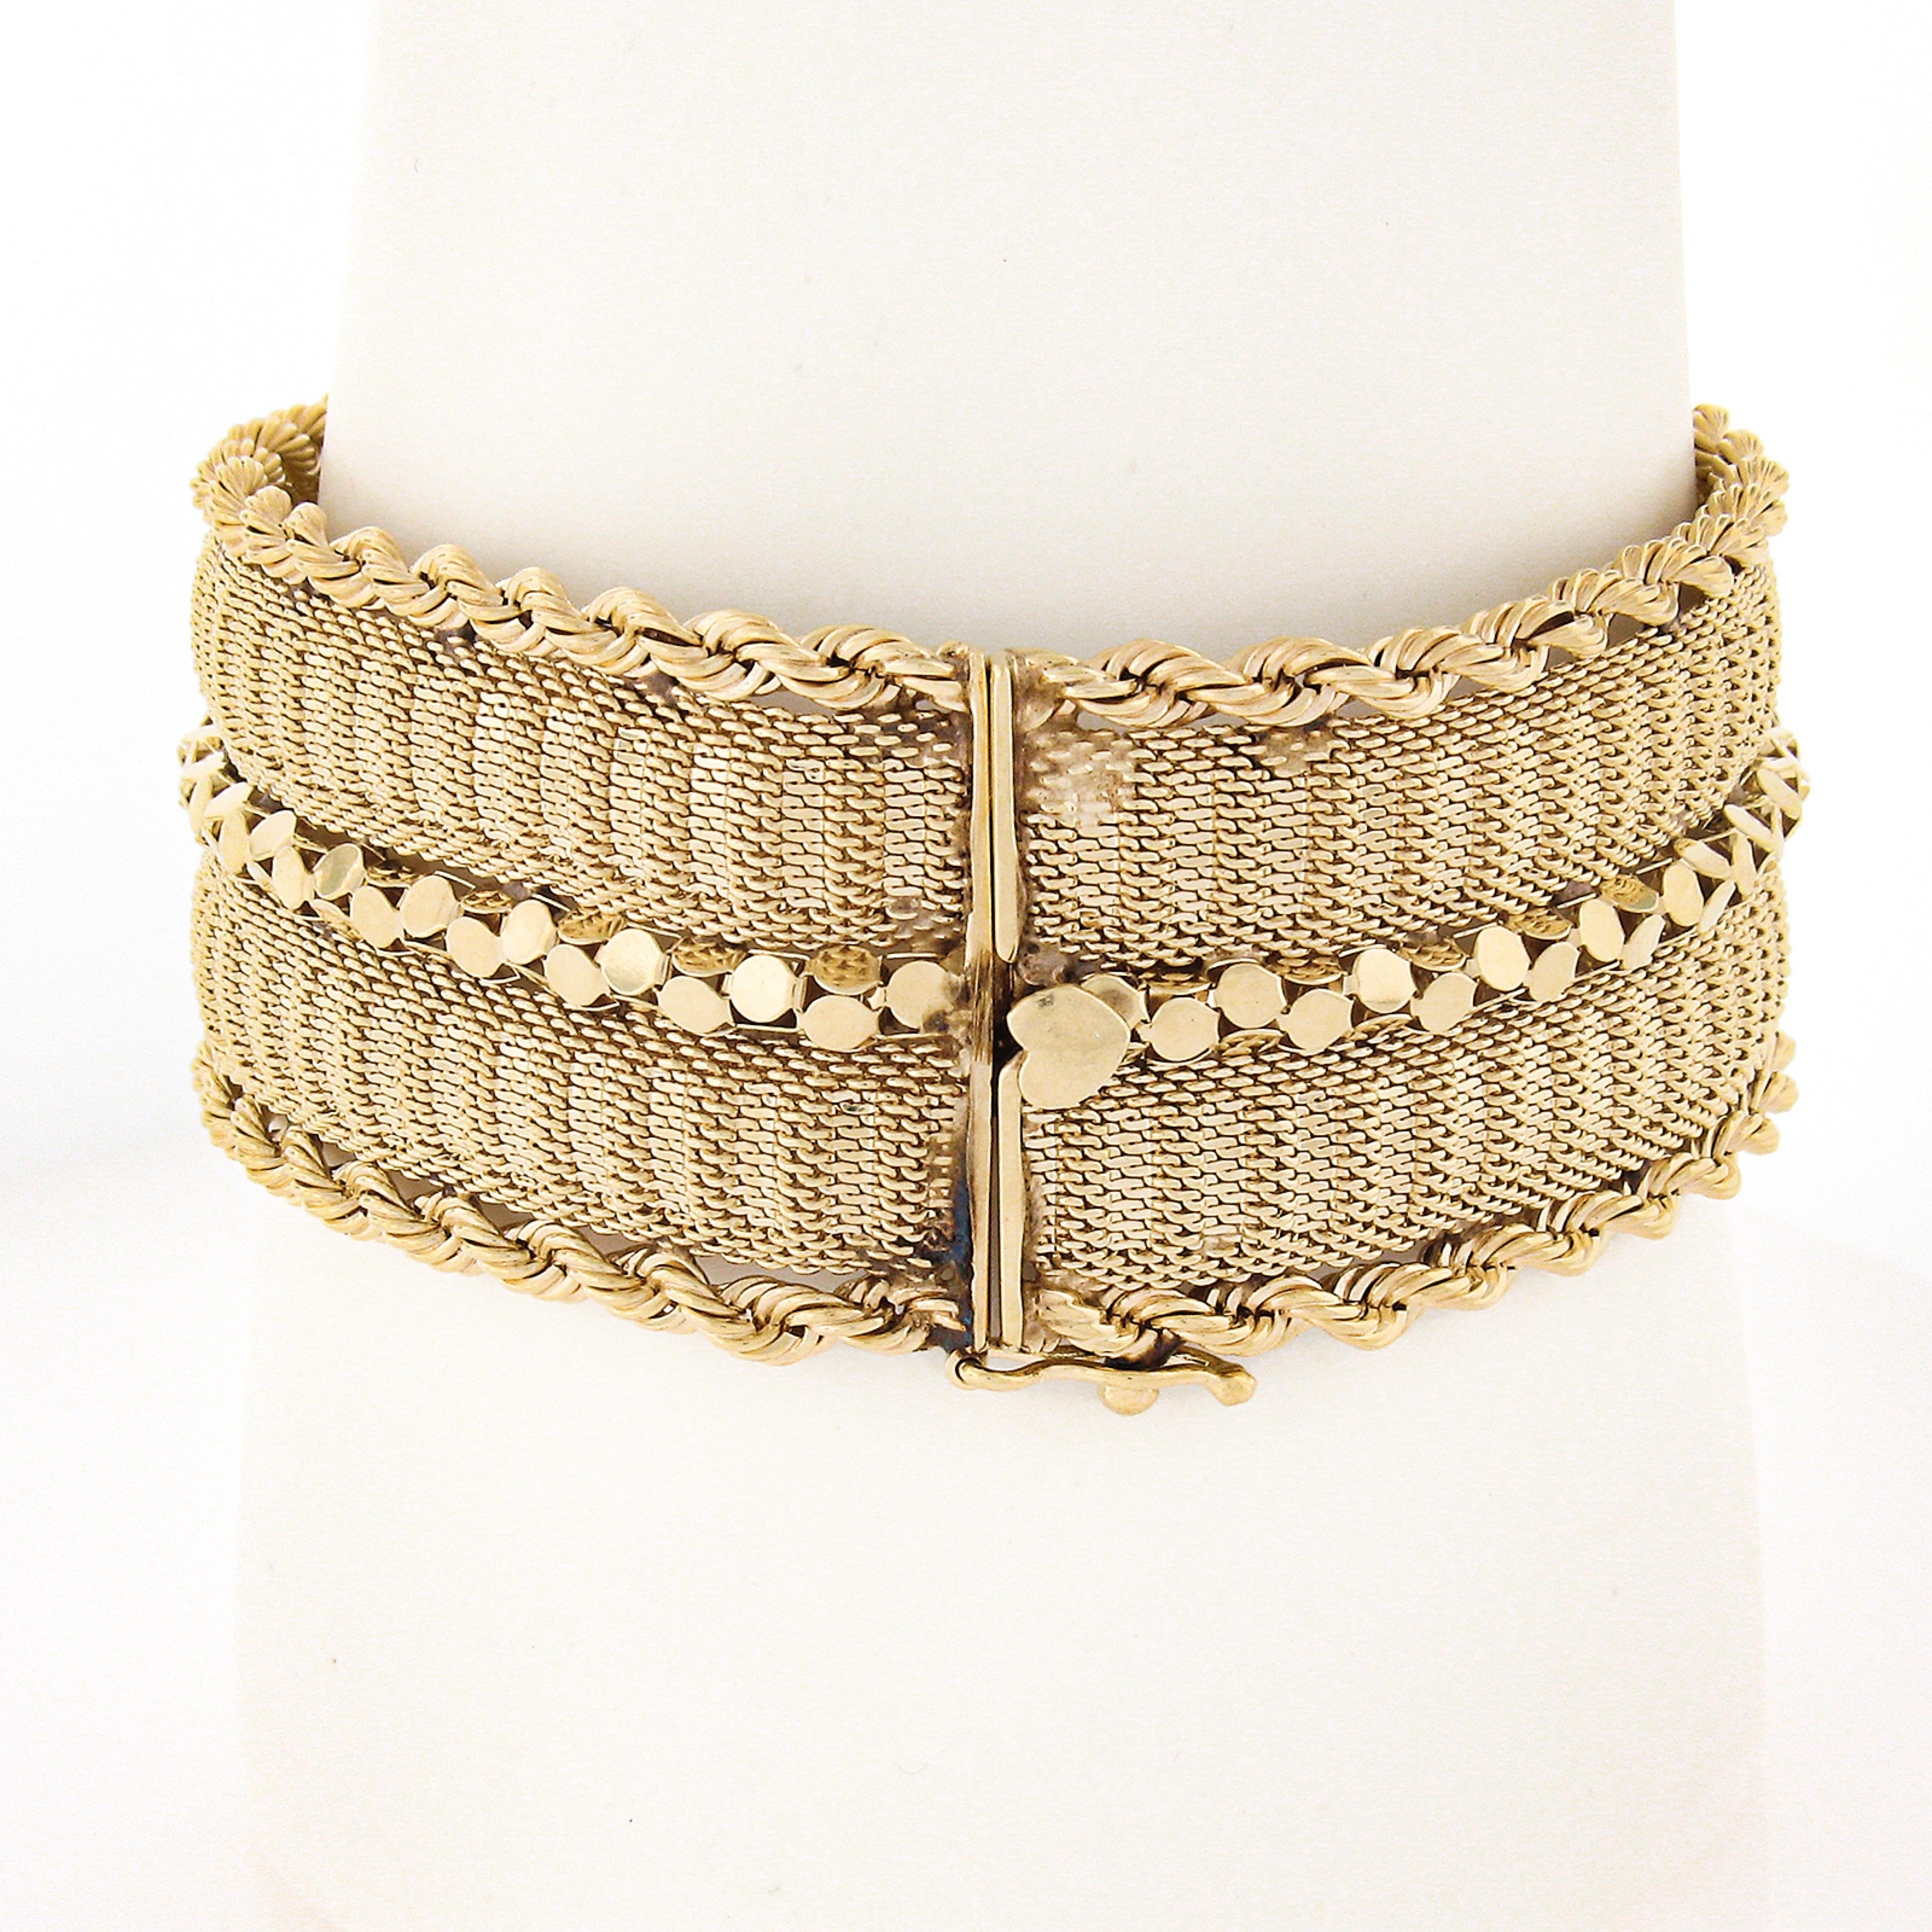 You are looking at a gorgeous and well made vintage bracelet that was crafted from solid 14k yellow gold. This unique wide strap bracelet is constructed from mesh link with high polished popcorn links that run through the center, and further